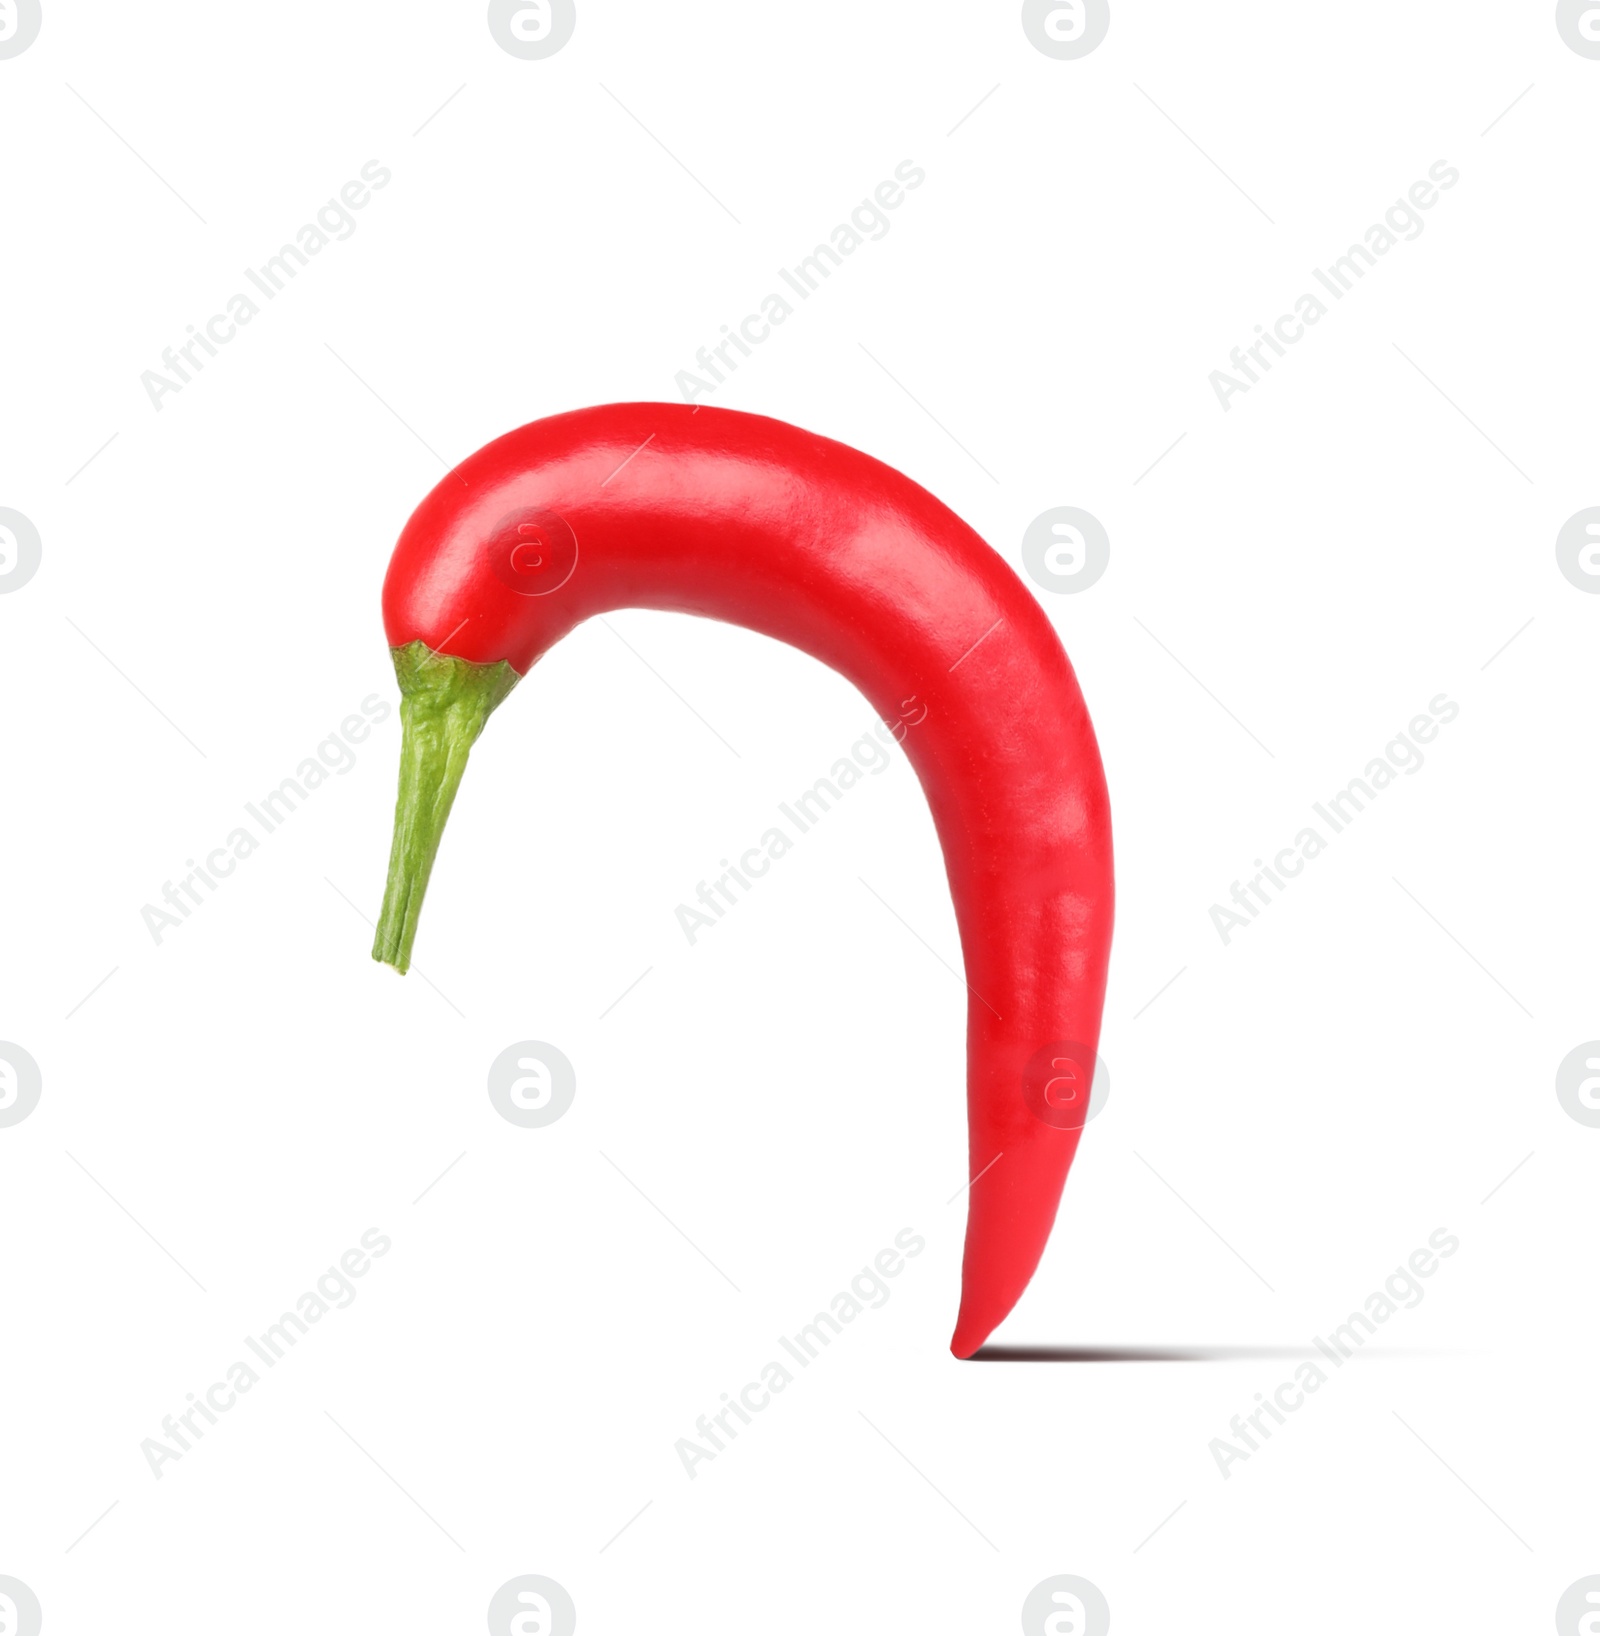 Image of Chili pepper symbolizing male sexual organ on white background. Potency problem